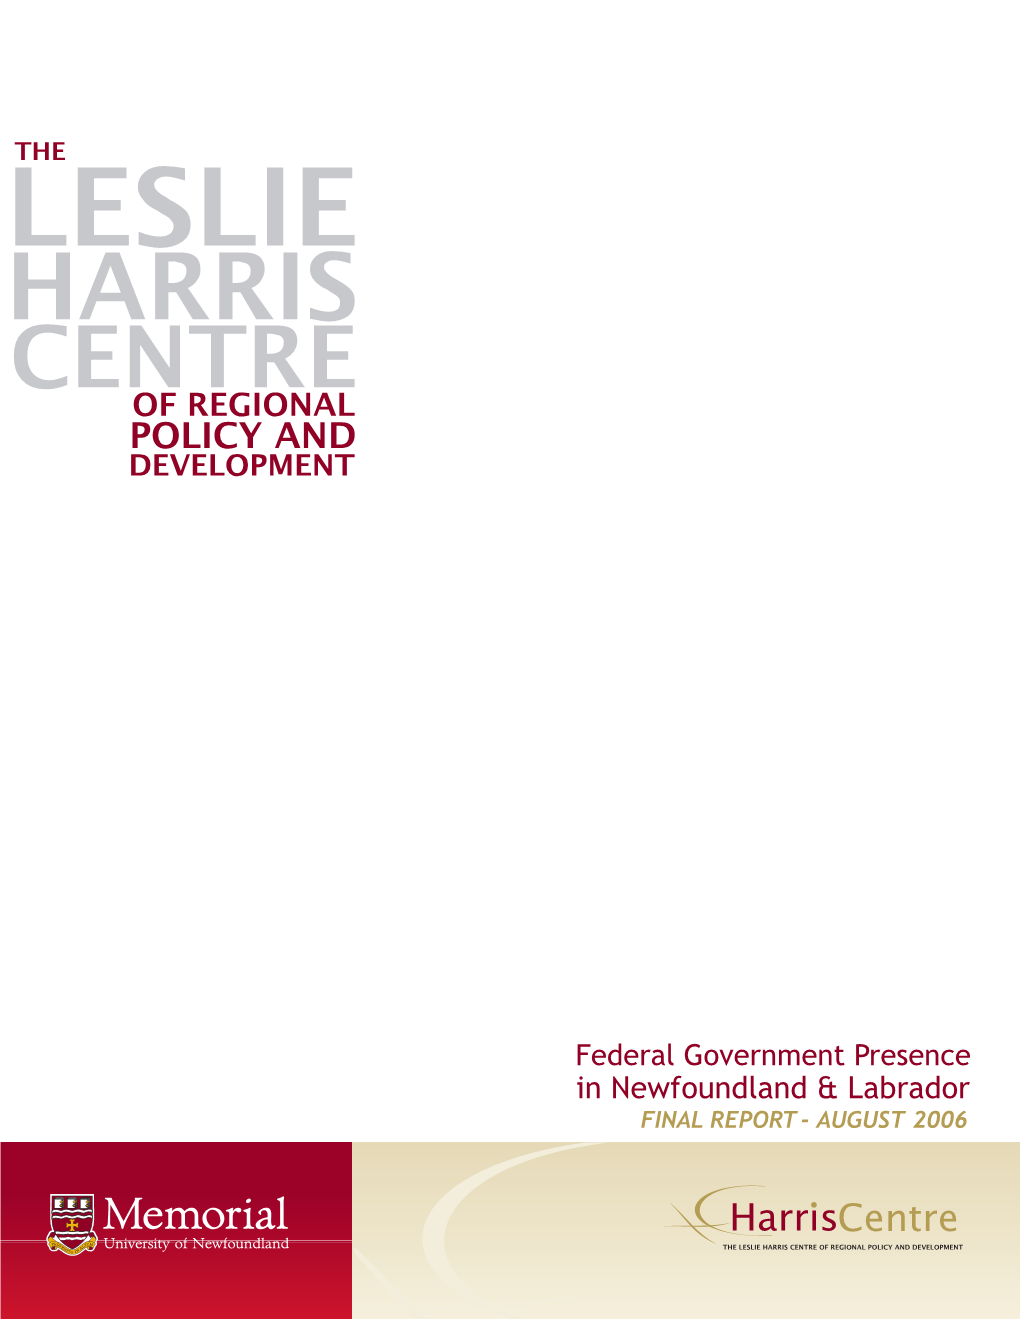 Federal Government Presence in Newfoundland and Labrador